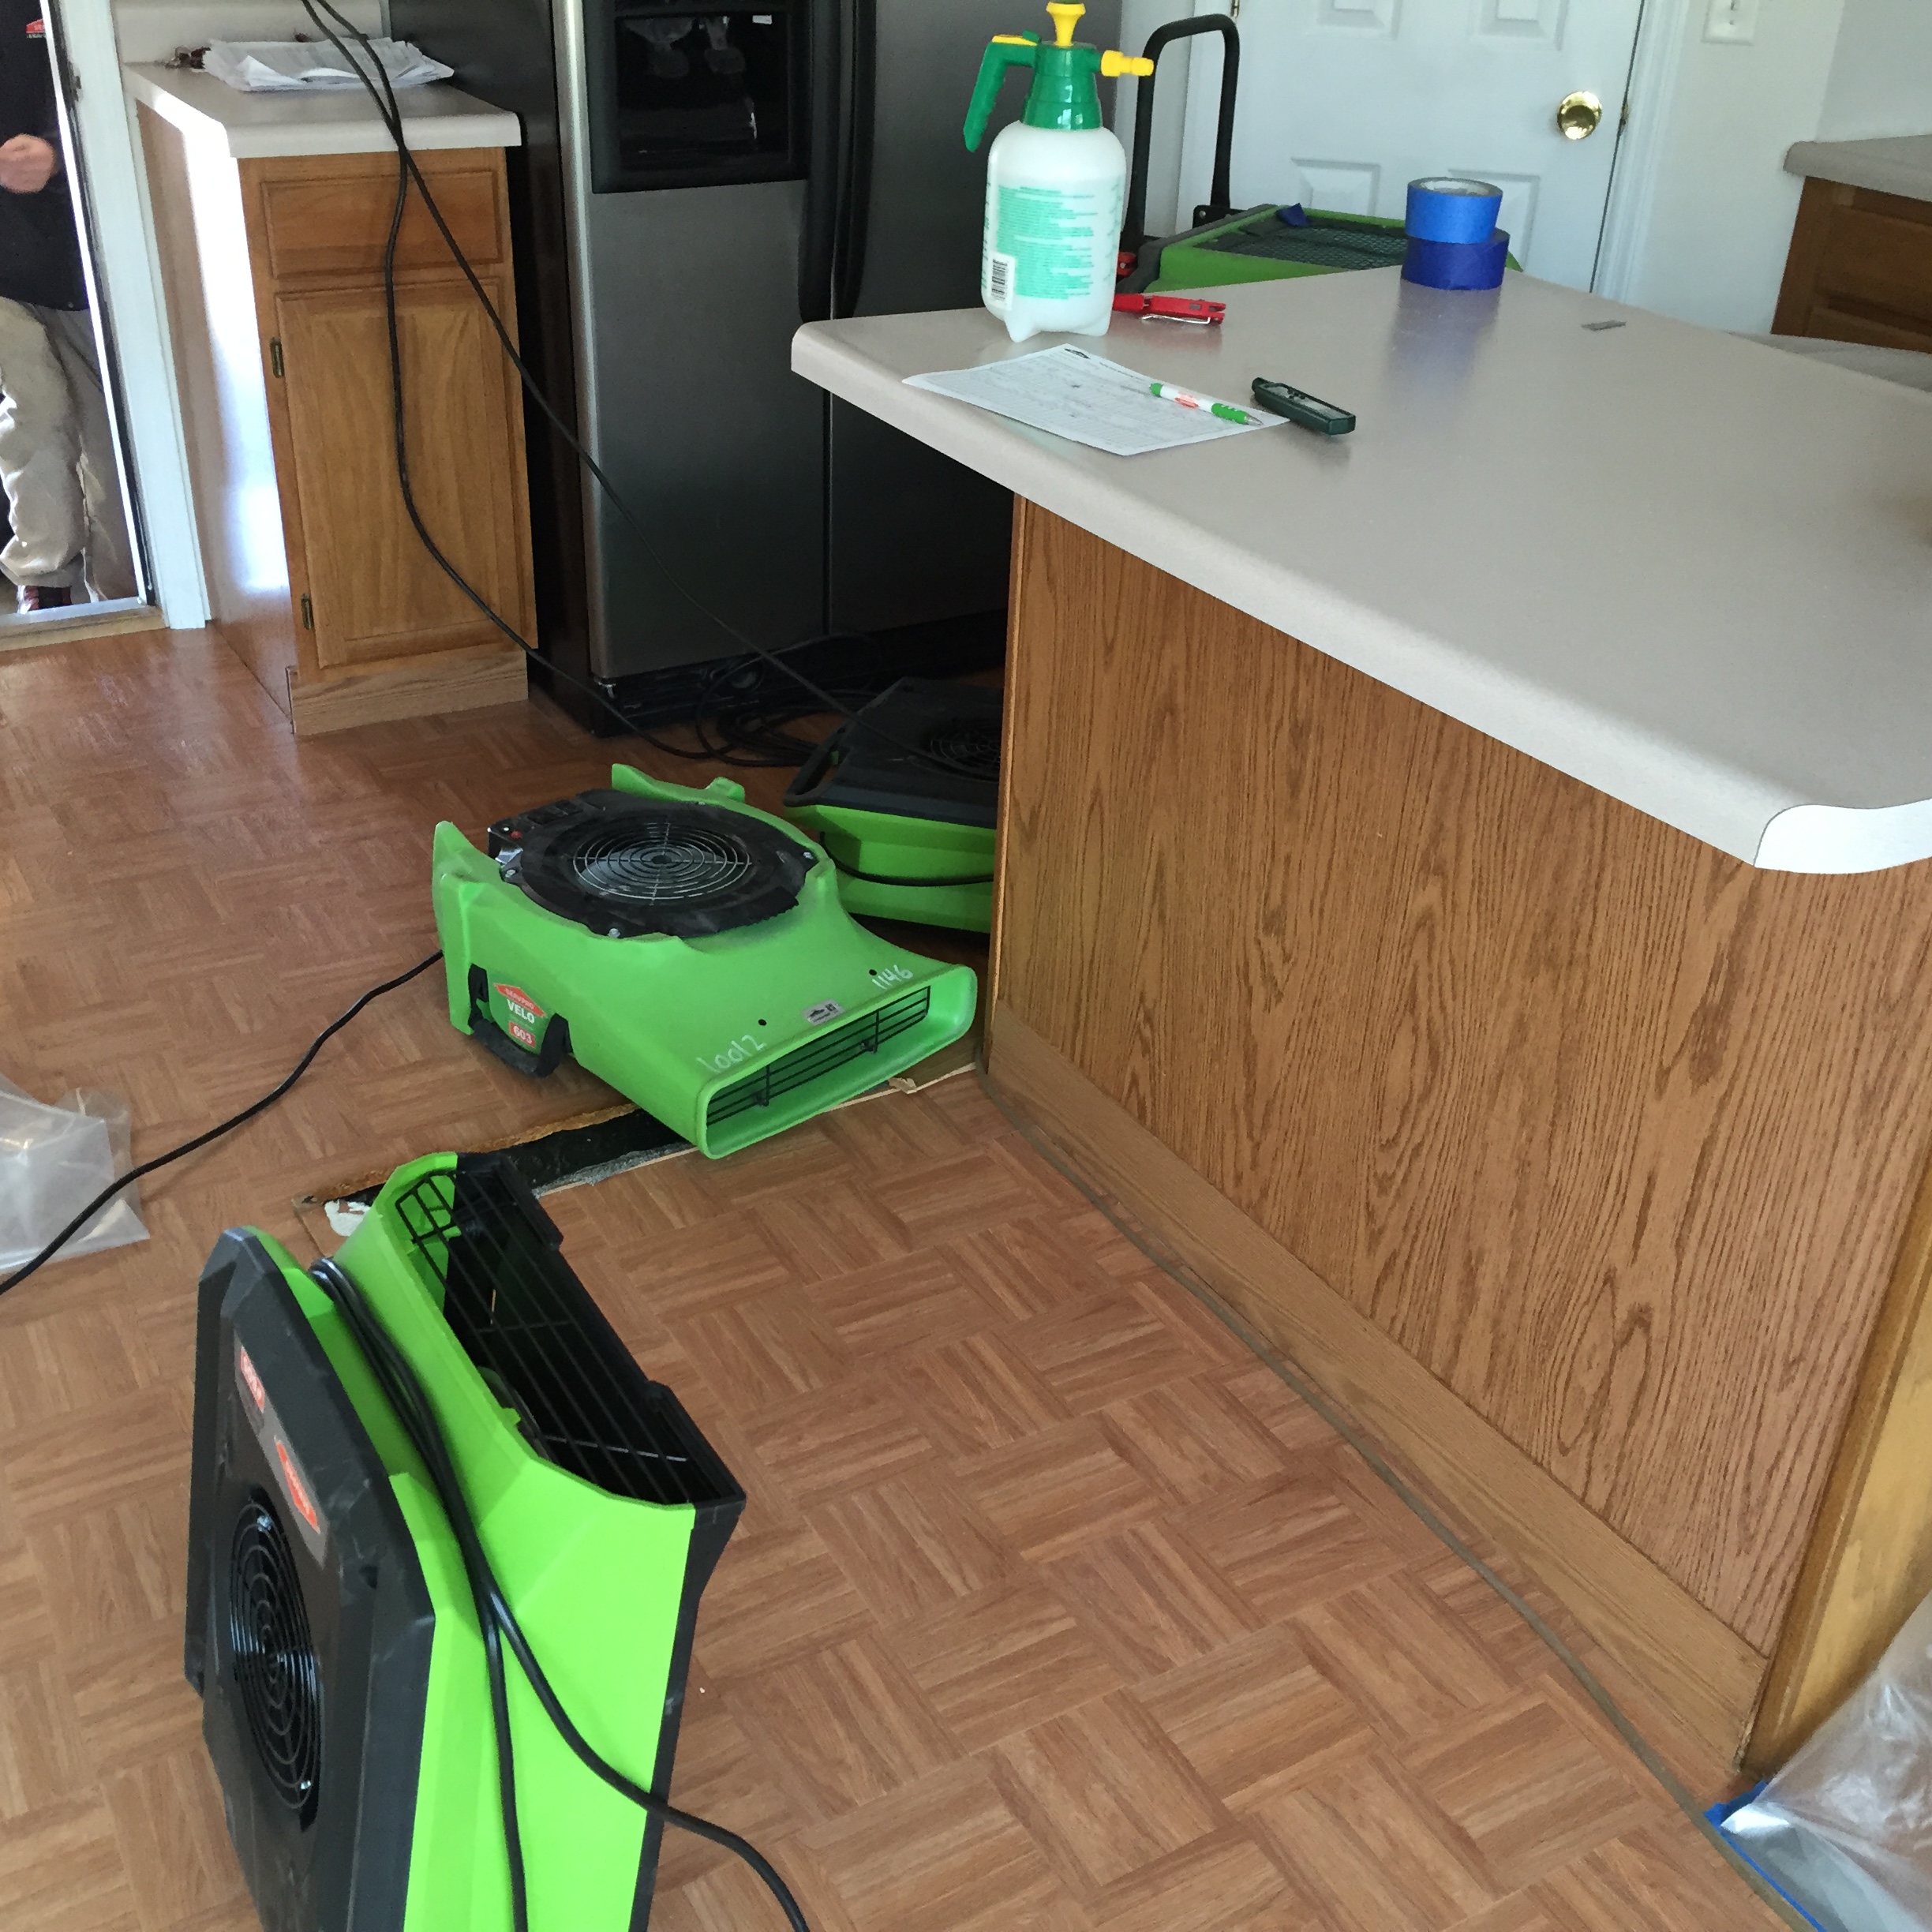 Water damage? Don't worry. SERVPRO is here to help.